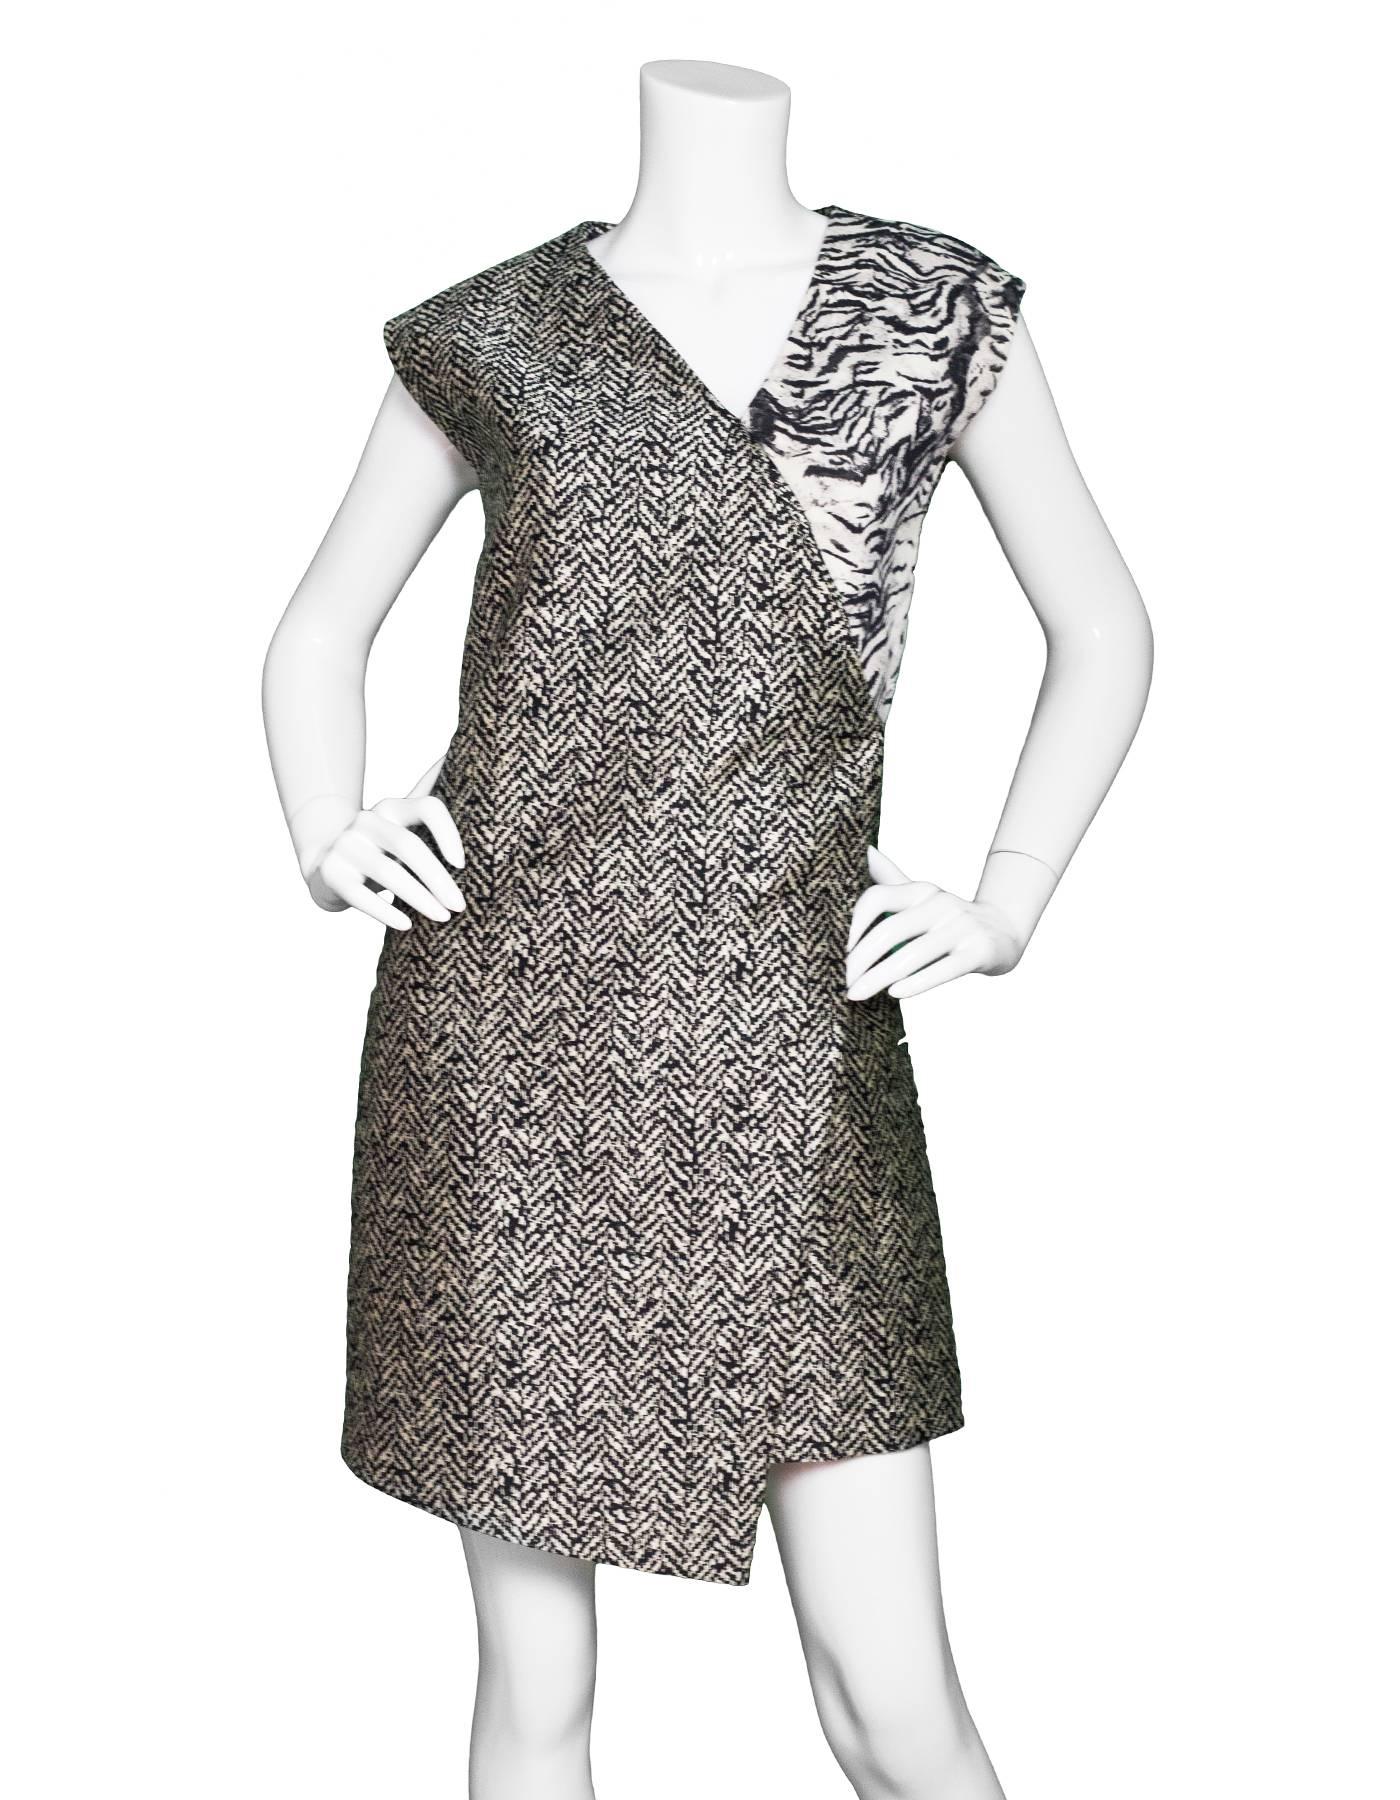 Emanuel Ungaro Print Sleeveless Dress Sz 4
Features heringbone print throughout and faux wrap-style at front

Made In: Italy
Color: Black, grey
Composition: 83% polyester, 17% silk
Lining: Black, nylon-blend
Closure/Opening: Back zip